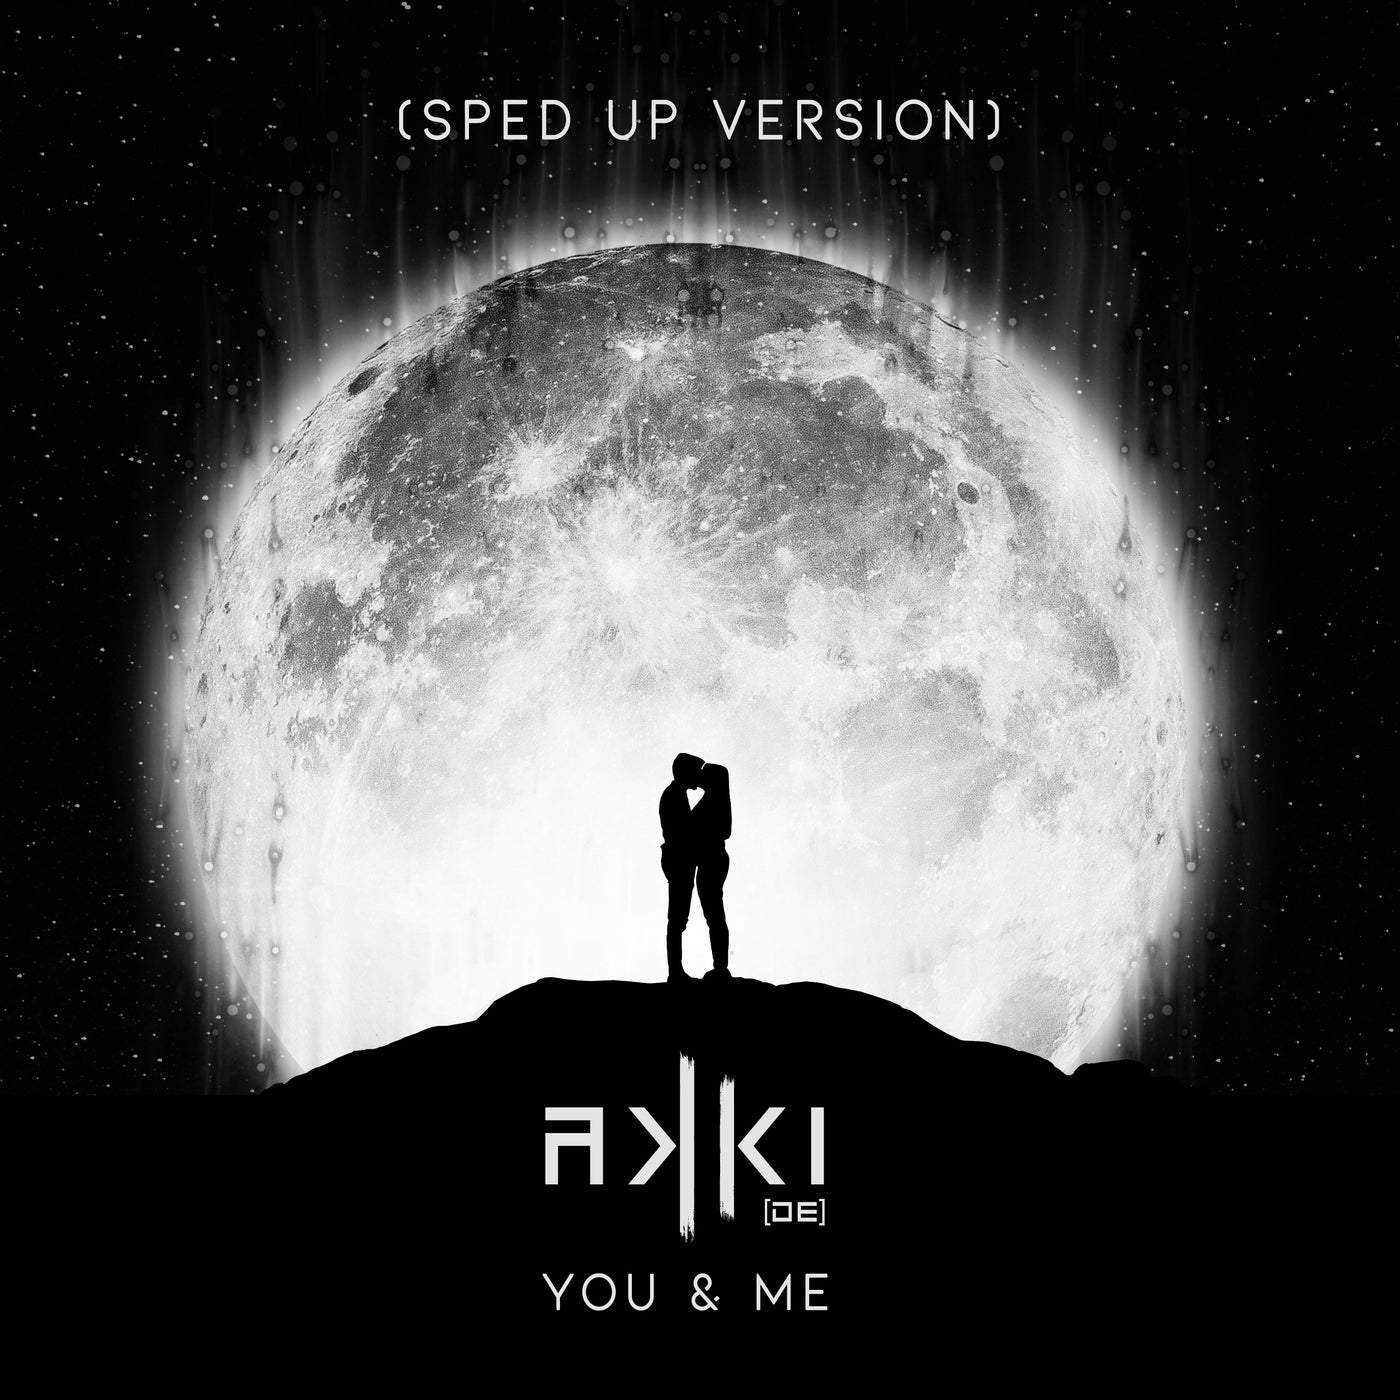 Release Cover: AKKI (DE) - You & Me - Sped Up Extended Version on Electrobuzz